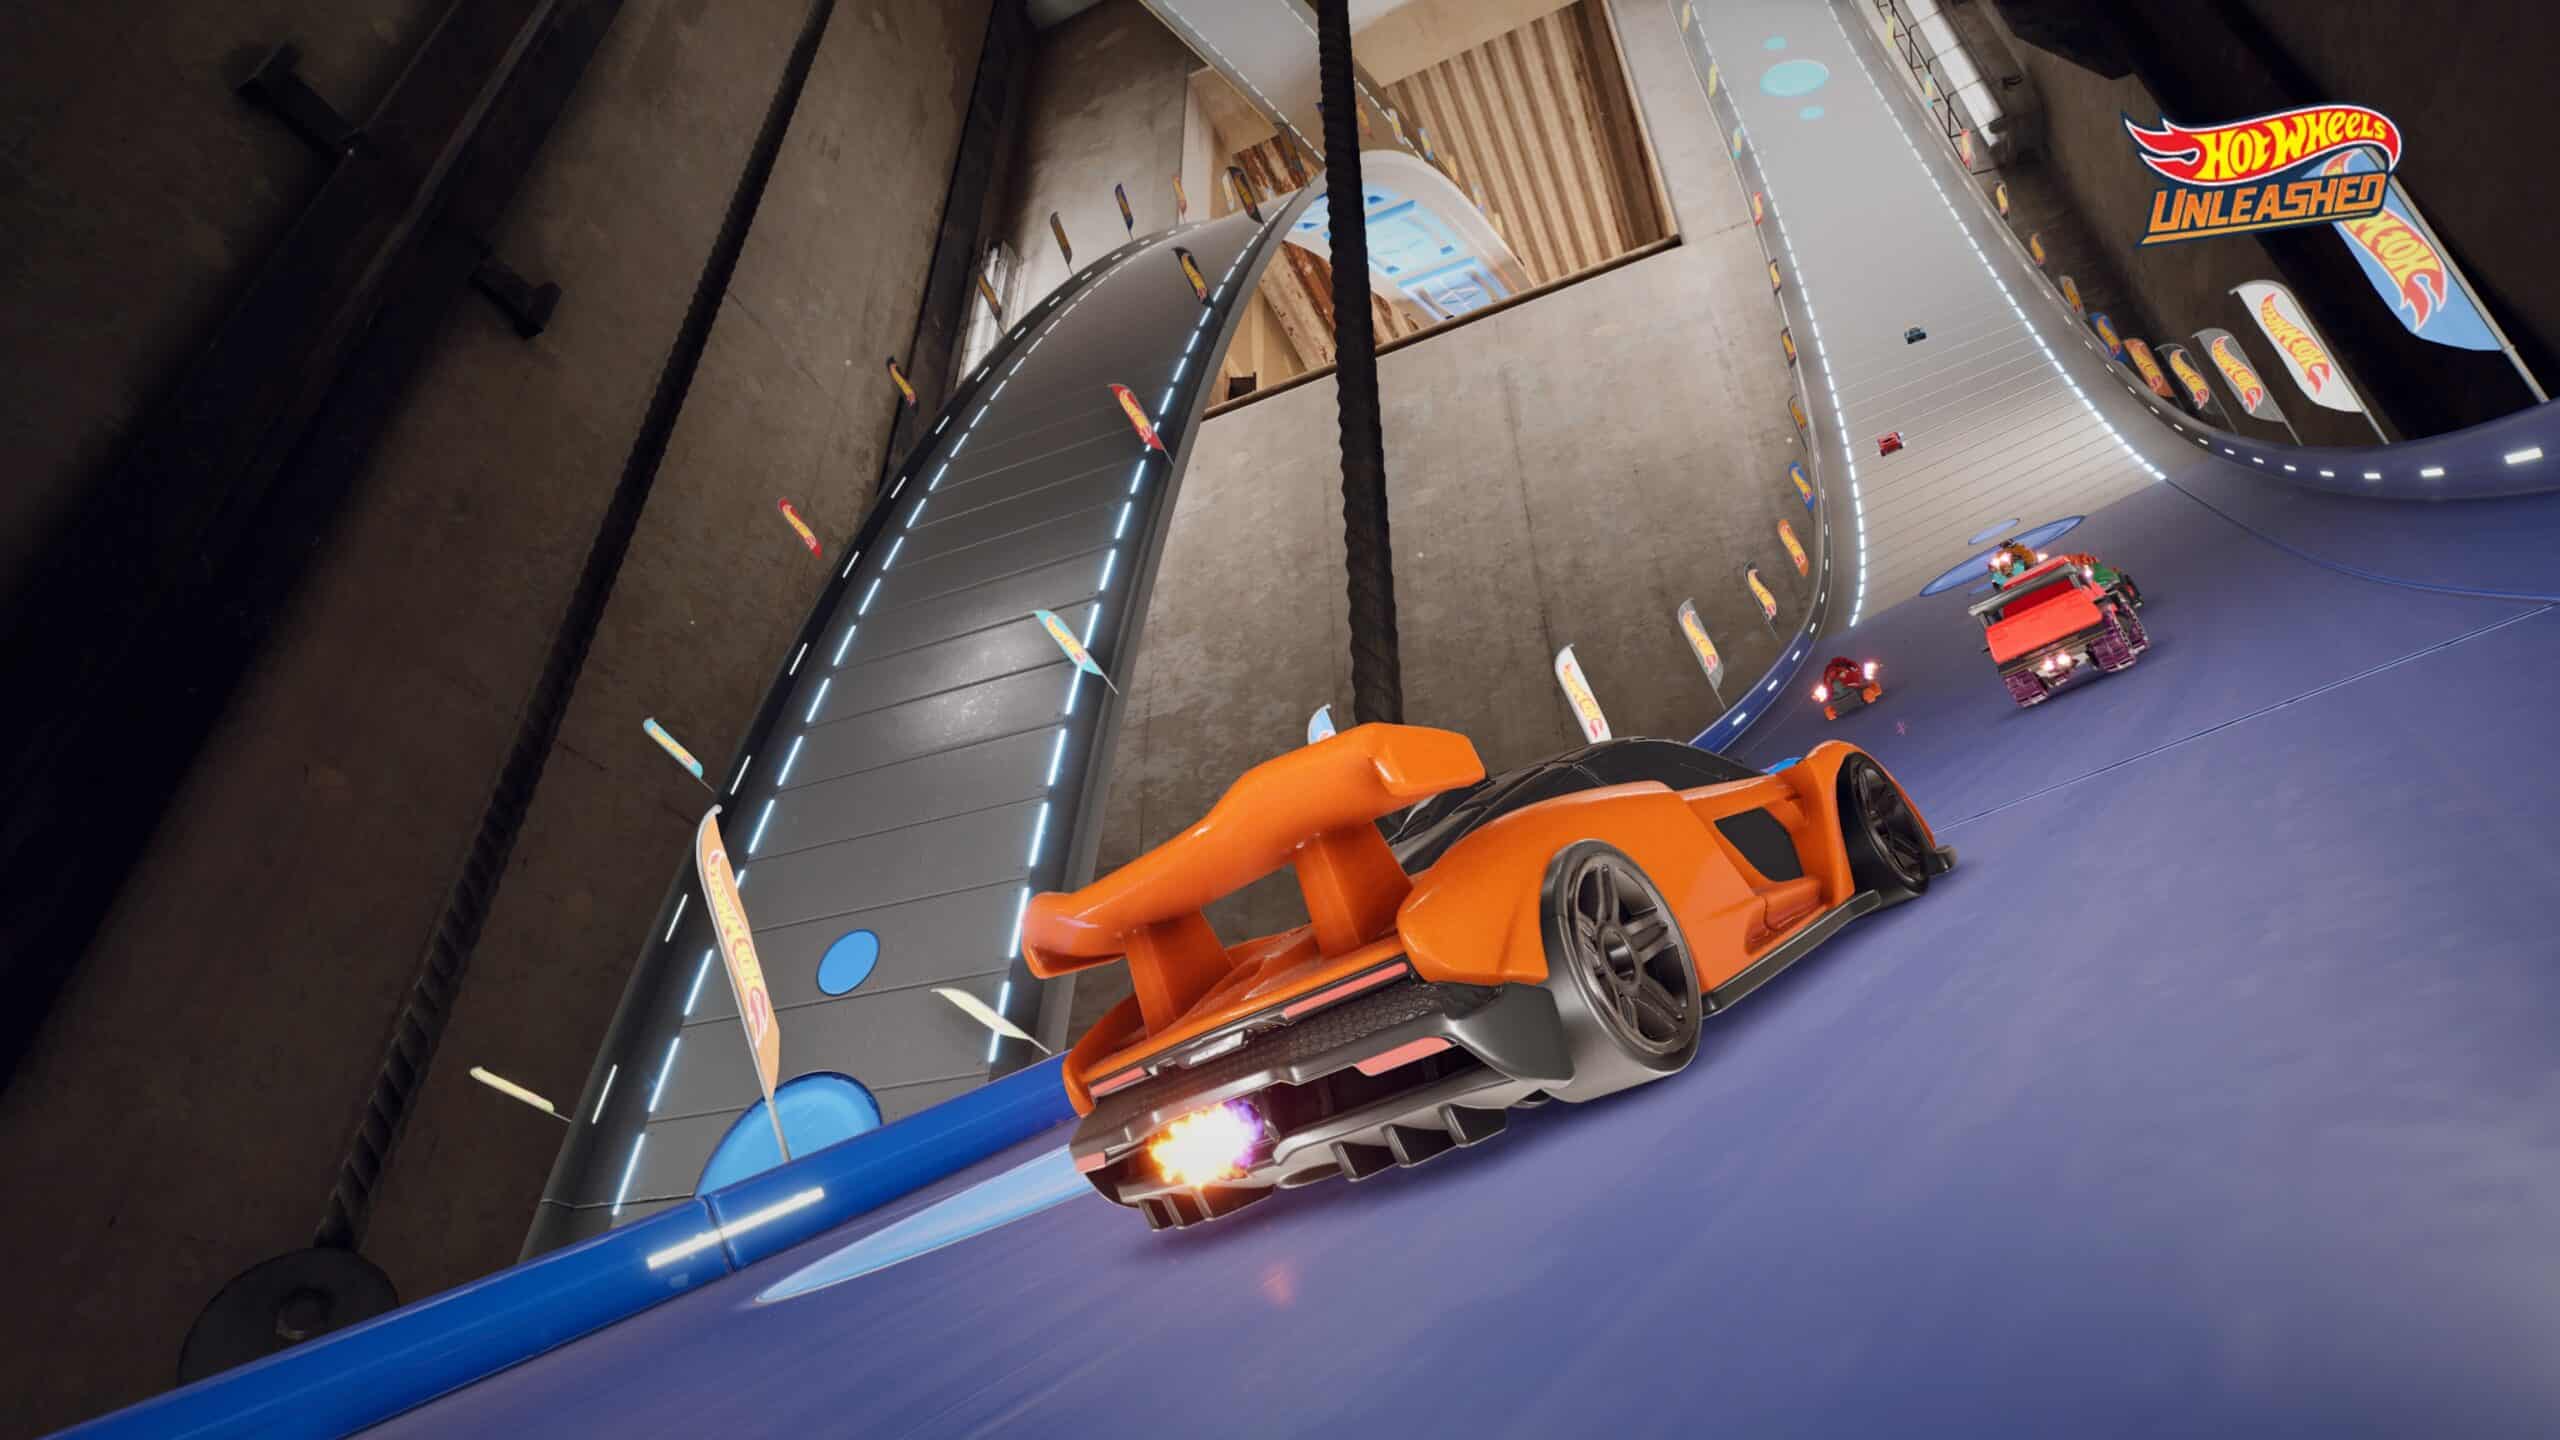 The McLaren Senna and Chevrolet Corvette are adorable in Hot Wheels Unleashed